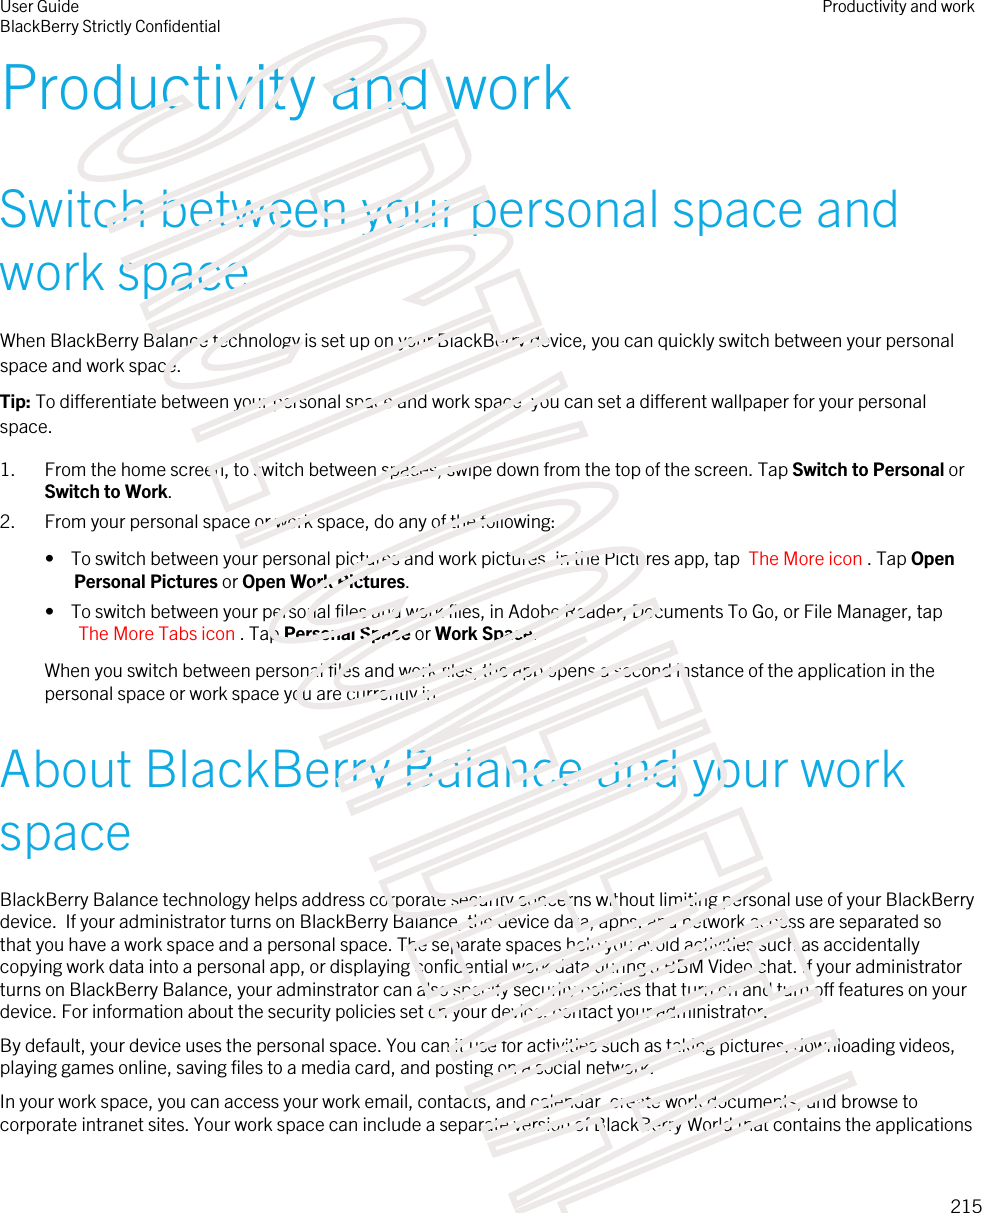 Productivity and workSwitch between your personal space and work spaceWhen BlackBerry Balance technology is set up on your BlackBerry device, you can quickly switch between your personal space and work space.Tip: To differentiate between your personal space and work space, you can set a different wallpaper for your personal space.1. From the home screen, to switch between spaces, swipe down from the top of the screen. Tap Switch to Personal or Switch to Work.2. From your personal space or work space, do any of the following:•  To switch between your personal pictures and work pictures, in the Pictures app, tap  The More icon . Tap Open Personal Pictures or Open Work Pictures.•  To switch between your personal files and work files, in Adobe Reader, Documents To Go, or File Manager, tap The More Tabs icon . Tap Personal Space or Work Space.When you switch between personal files and work files, the app opens a second instance of the application in the personal space or work space you are currently in.About BlackBerry Balance and your work spaceBlackBerry Balance technology helps address corporate security concerns without limiting personal use of your BlackBerry device.  If your administrator turns on BlackBerry Balance, the device data, apps, and network access are separated so that you have a work space and a personal space. The separate spaces help you avoid activities such as accidentally copying work data into a personal app, or displaying confidential work data during a BBM Video chat. If your administrator turns on BlackBerry Balance, your adminstrator can also specify security policies that turn on and turn off features on your device. For information about the security policies set on your device, contact your administrator.By default, your device uses the personal space. You can it use for activities such as taking pictures, downloading videos, playing games online, saving files to a media card, and posting on a social network. In your work space, you can access your work email, contacts, and calendar, create work documents, and browse to corporate intranet sites. Your work space can include a separate version of BlackBerry World that contains the applications User GuideBlackBerry Strictly ConfidentialProductivity and work215STRICTLY CONFIDENTIAL